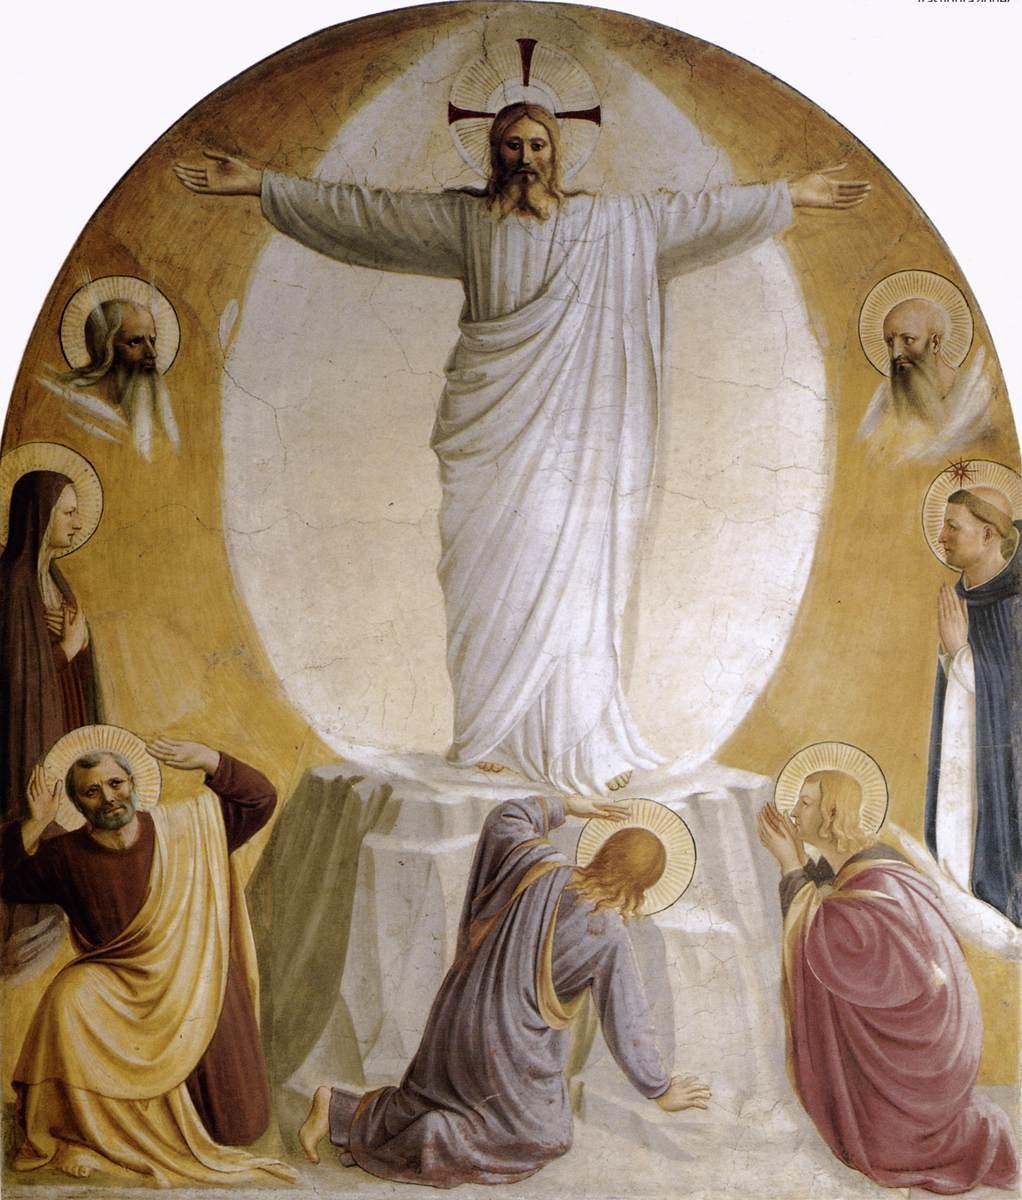 The Transfiguration, 1440-42, Fra Angelico 12: Second Sunday of Lent ------------- March 20, 2011 Happiness Up into a high mountain Our Lord took three of His Apostles.